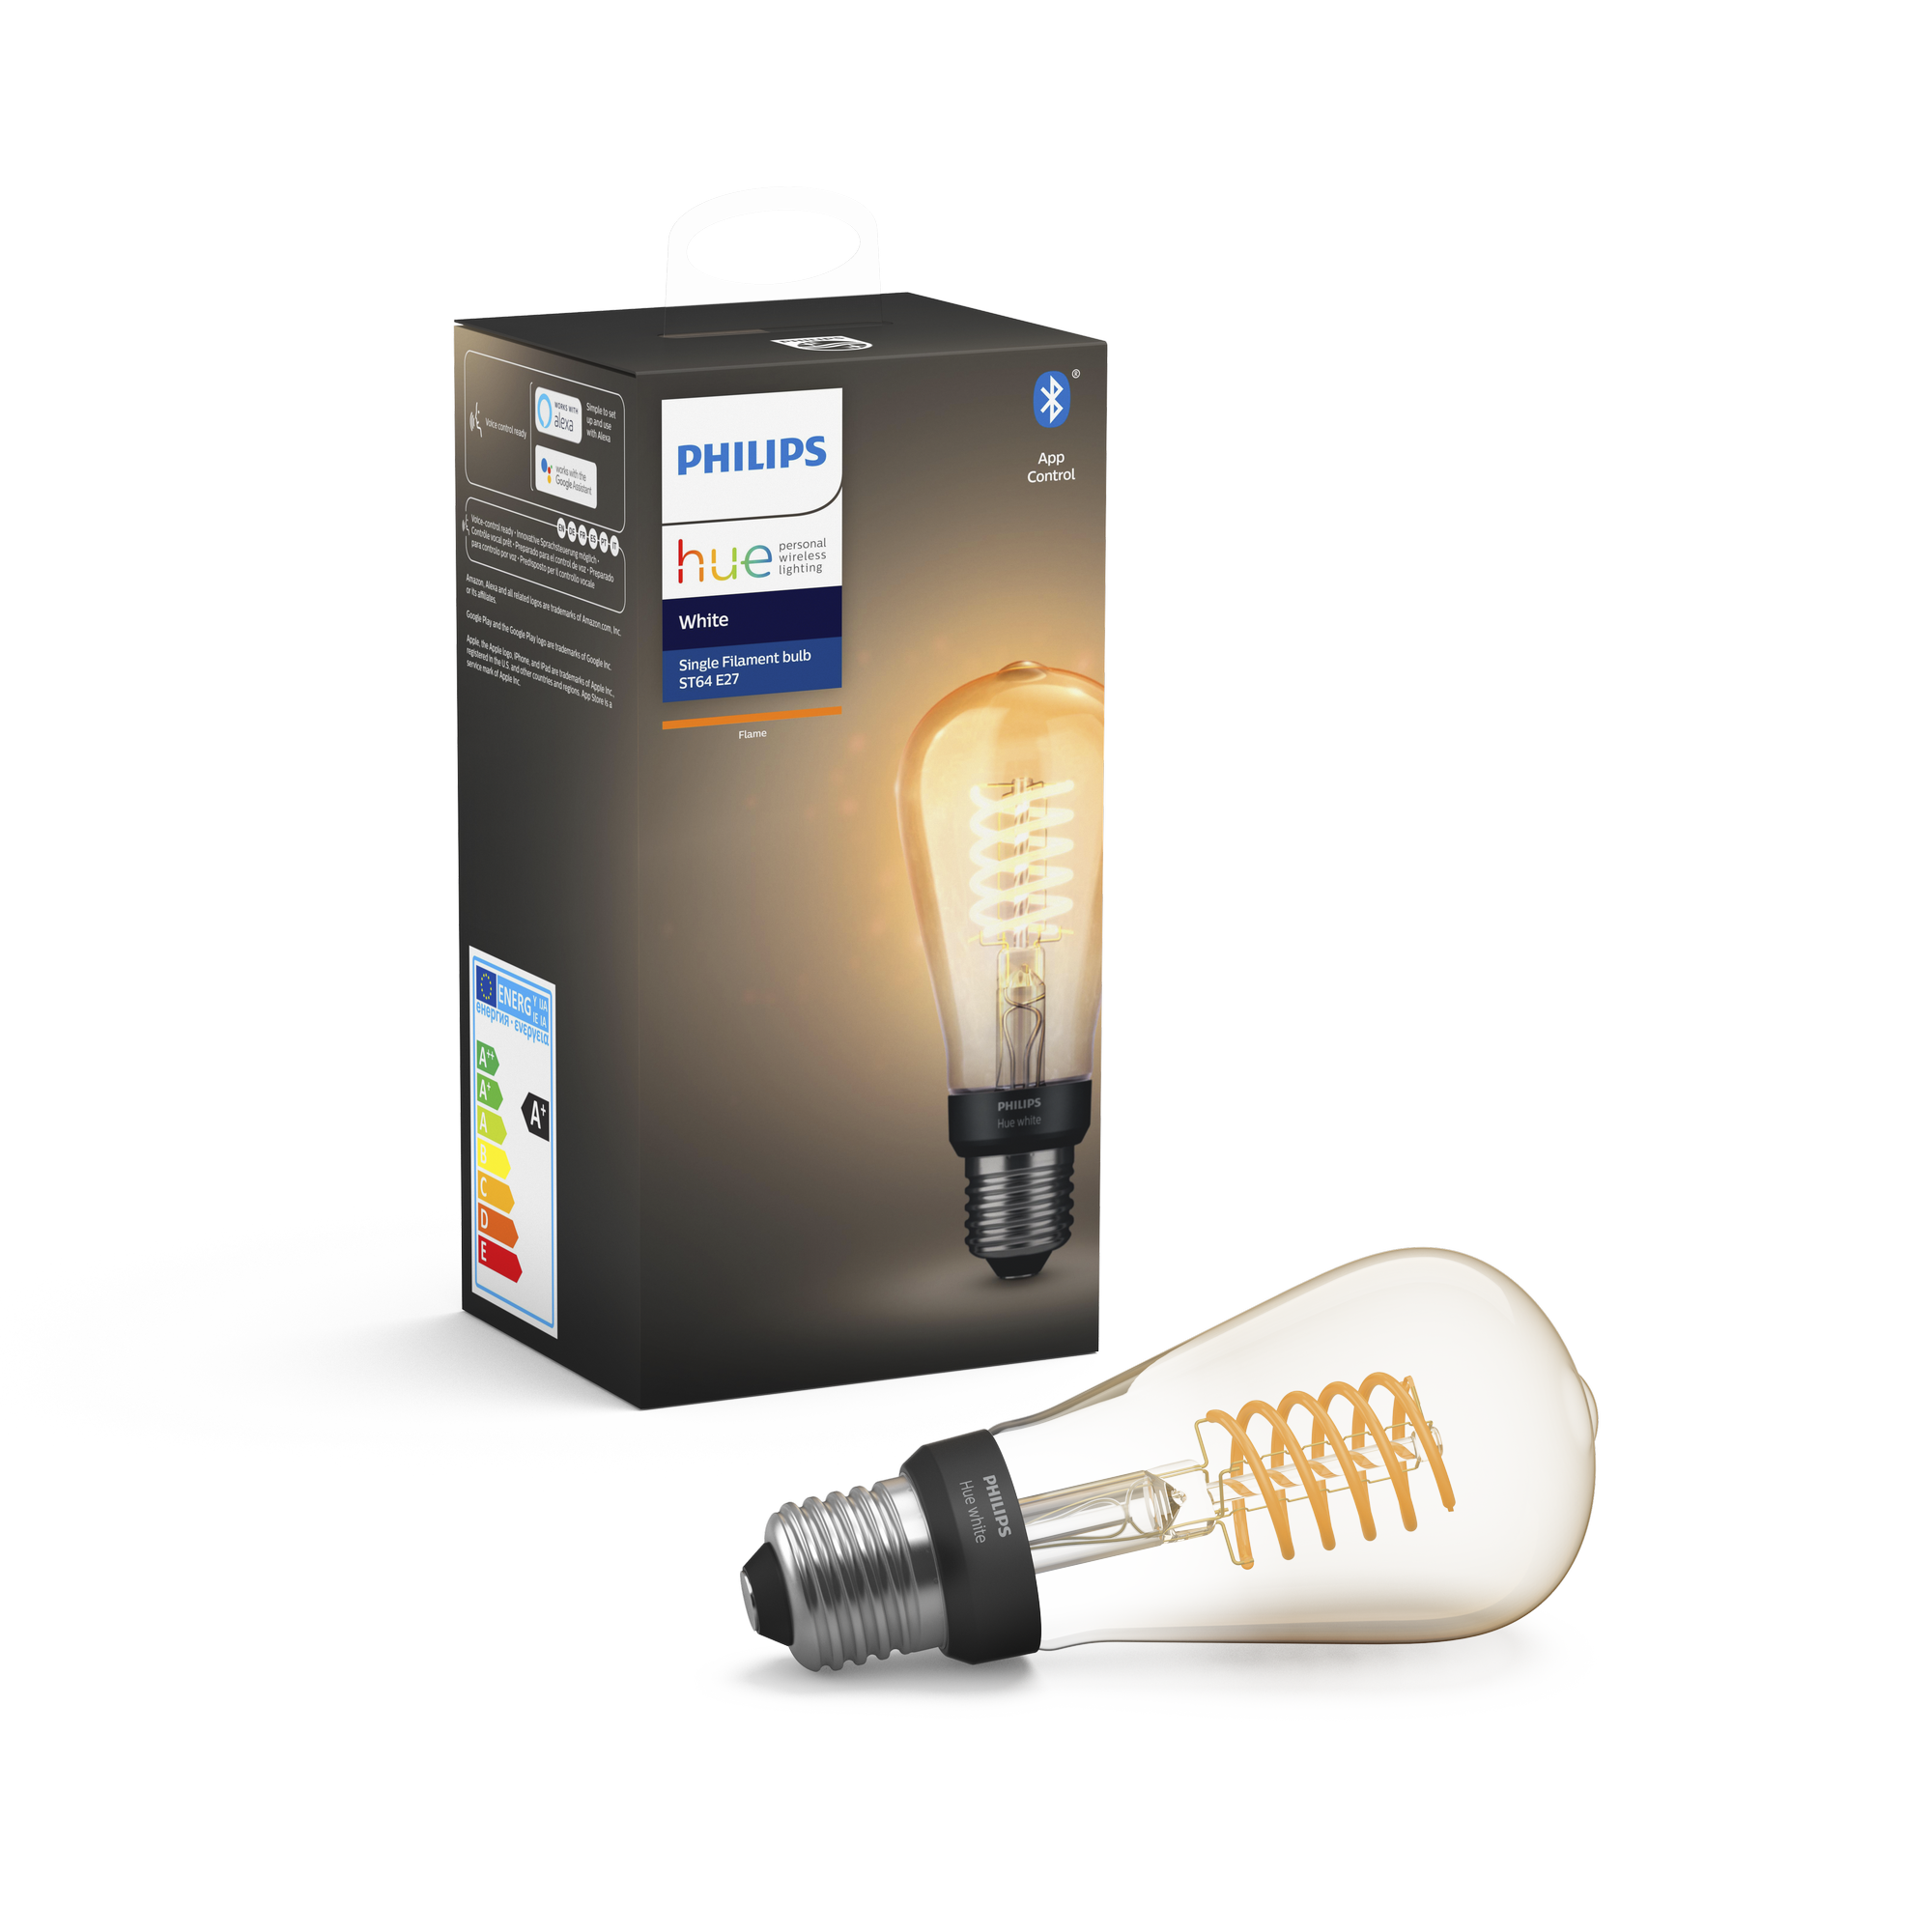 Philips LED-Lampe 'Hue' Filament ST64 White E27 Einzelpack 9W ǀ toom